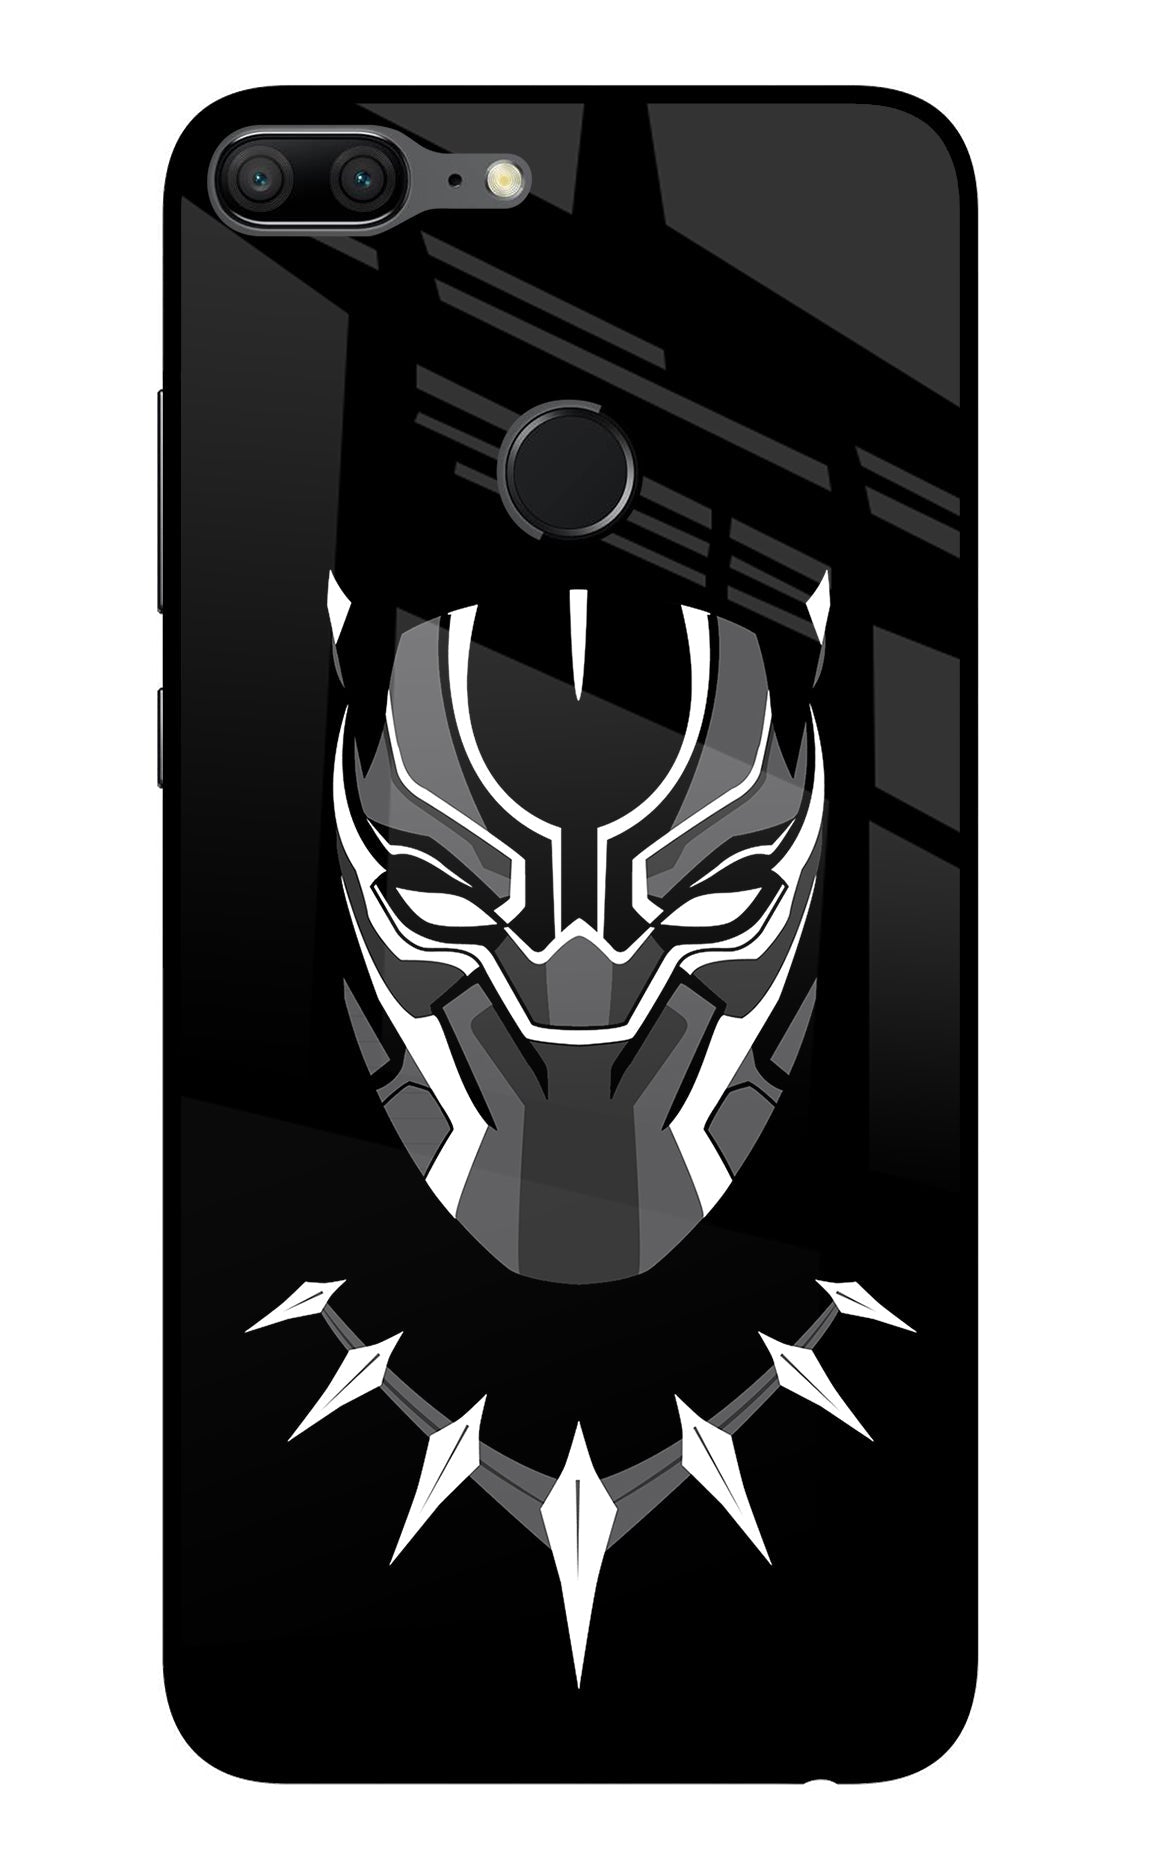 Black Panther Honor 9 Lite Back Cover